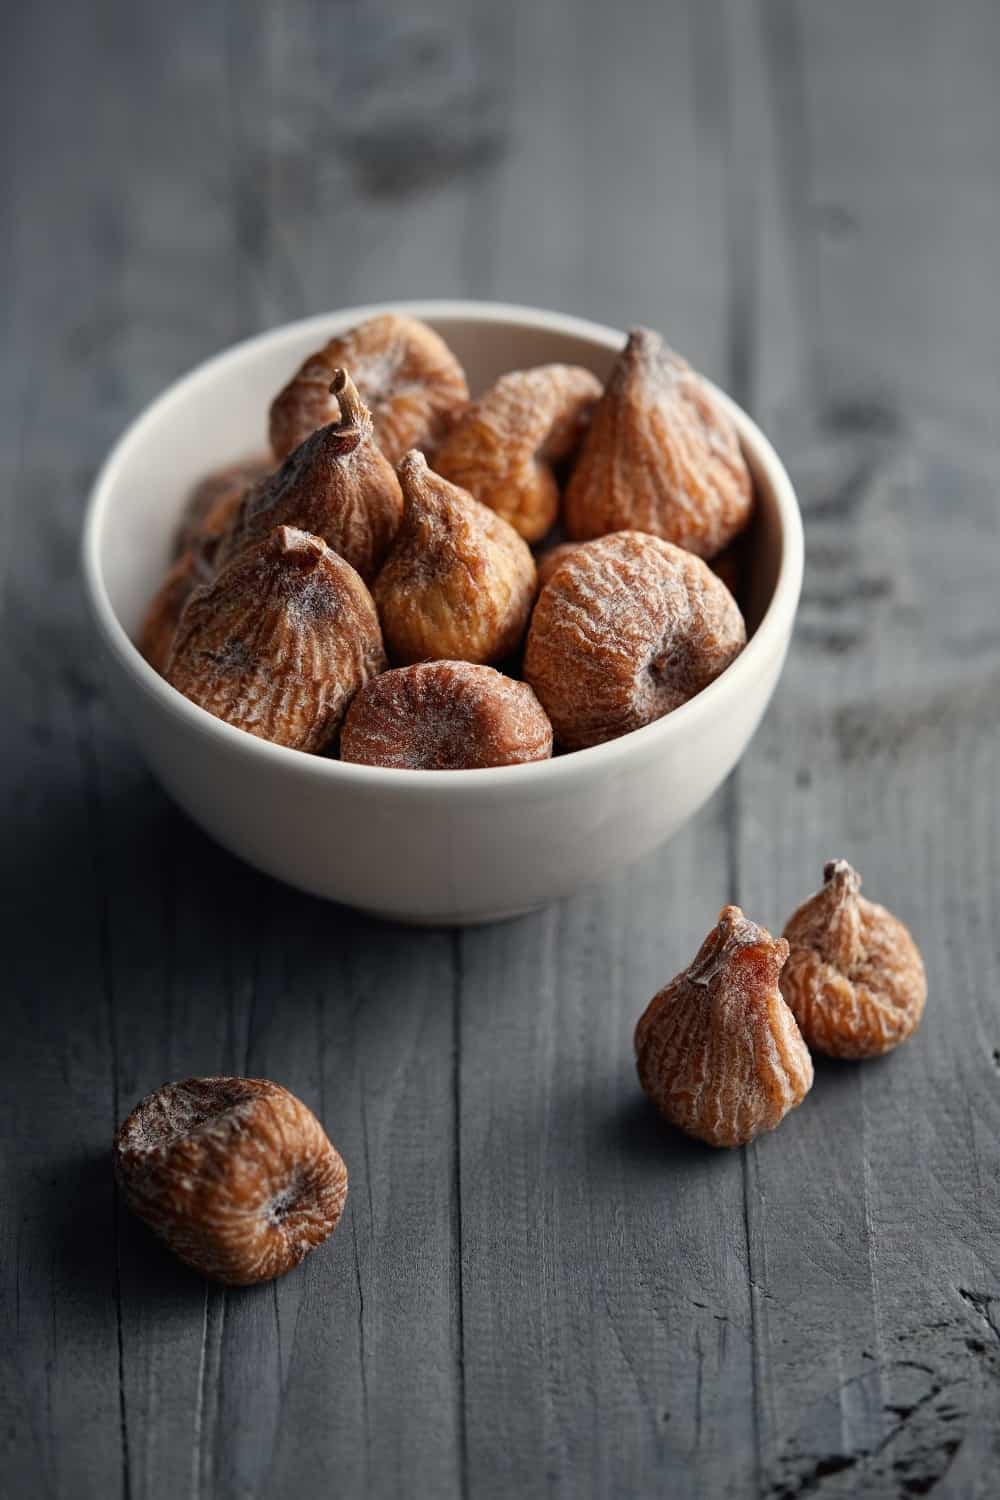 Dried figs in a bowl, on a grey surface